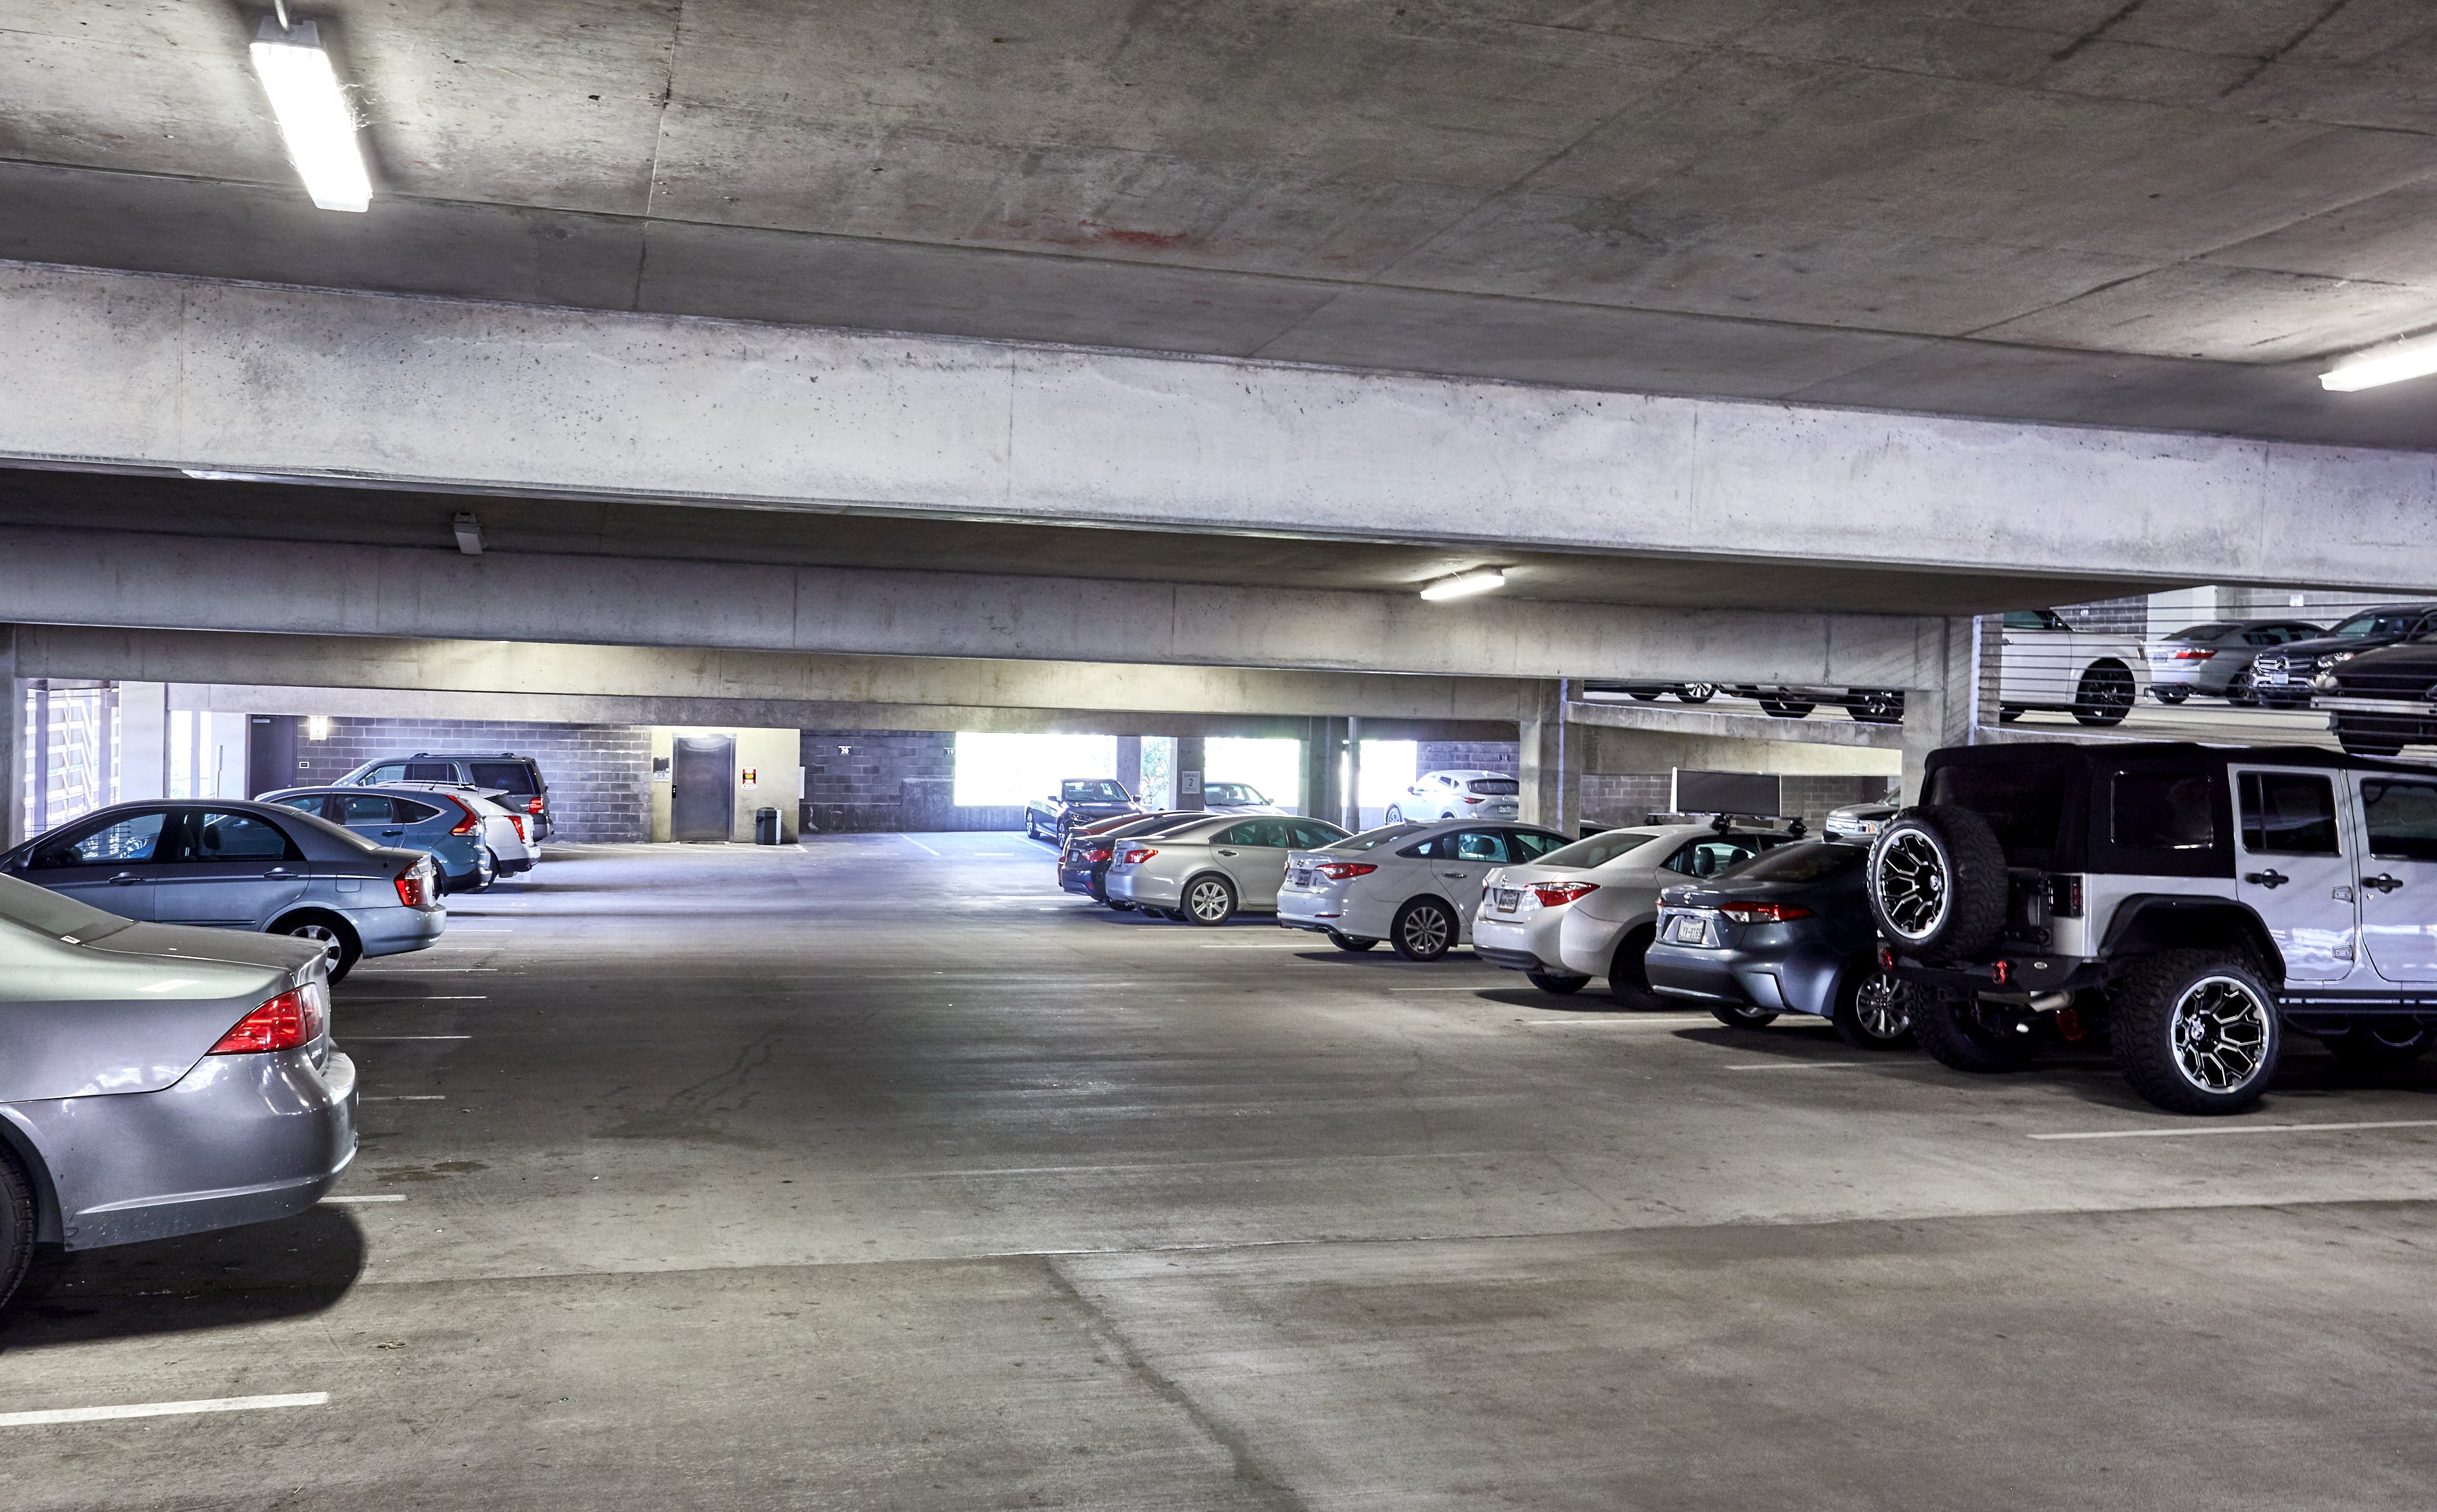 Multi-level parking garage with parked cars in it